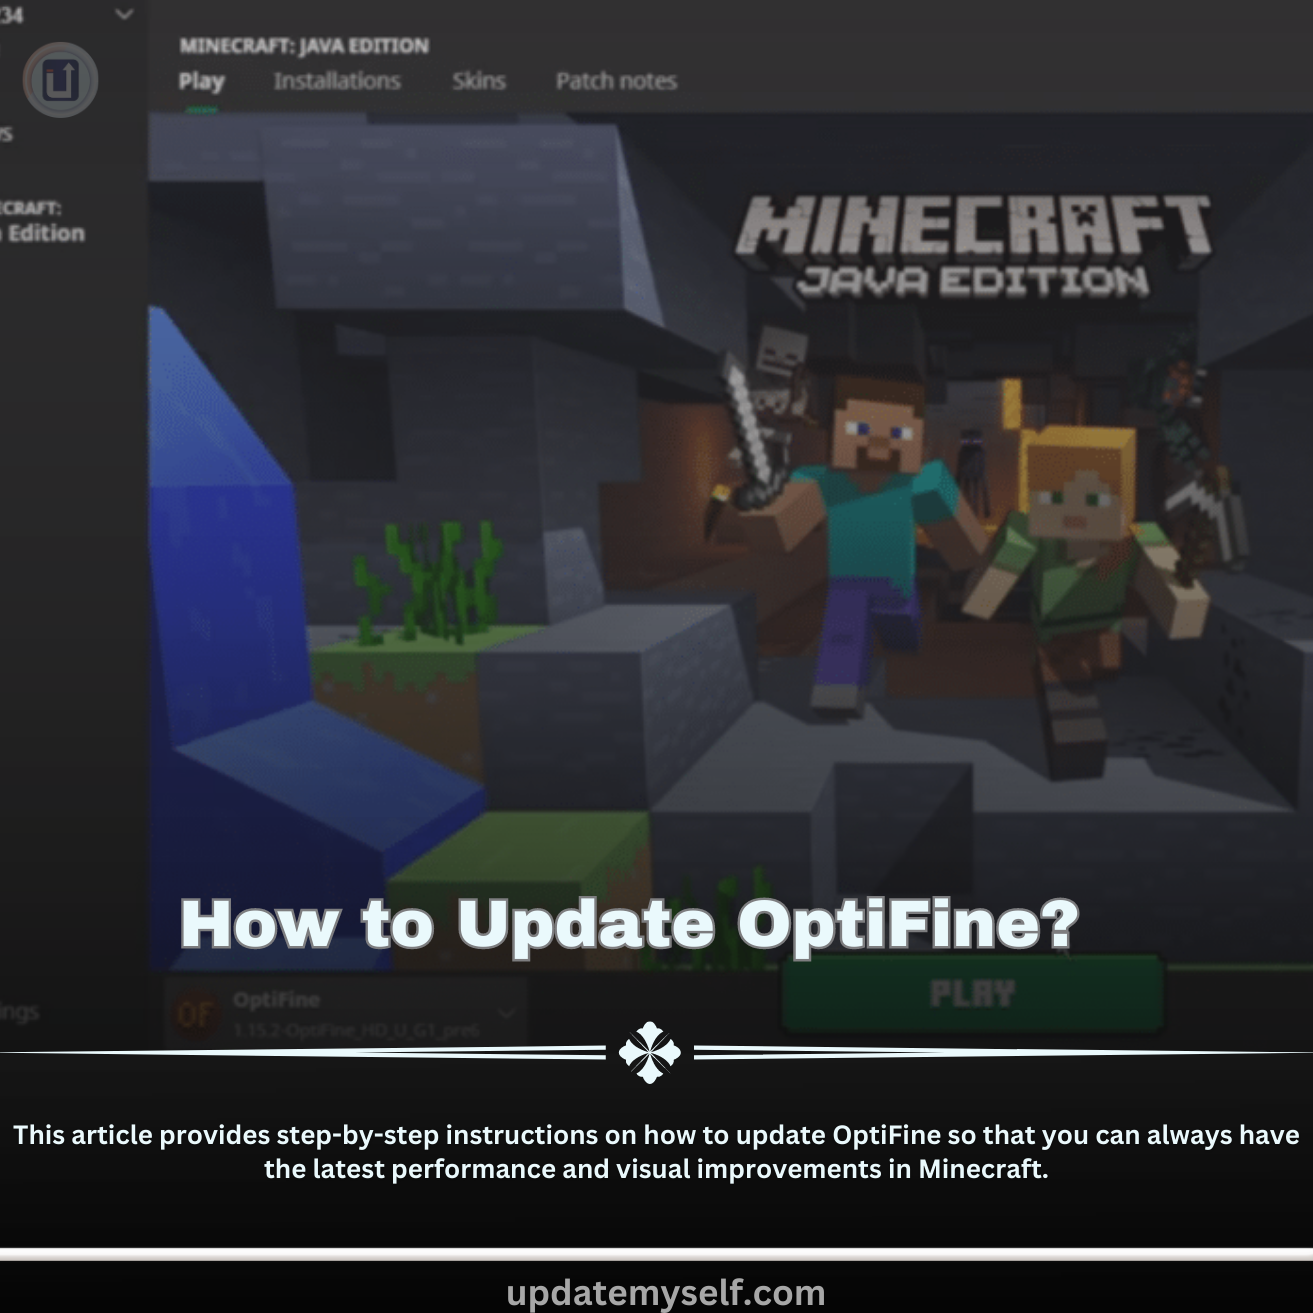 How to Update OptiFine?